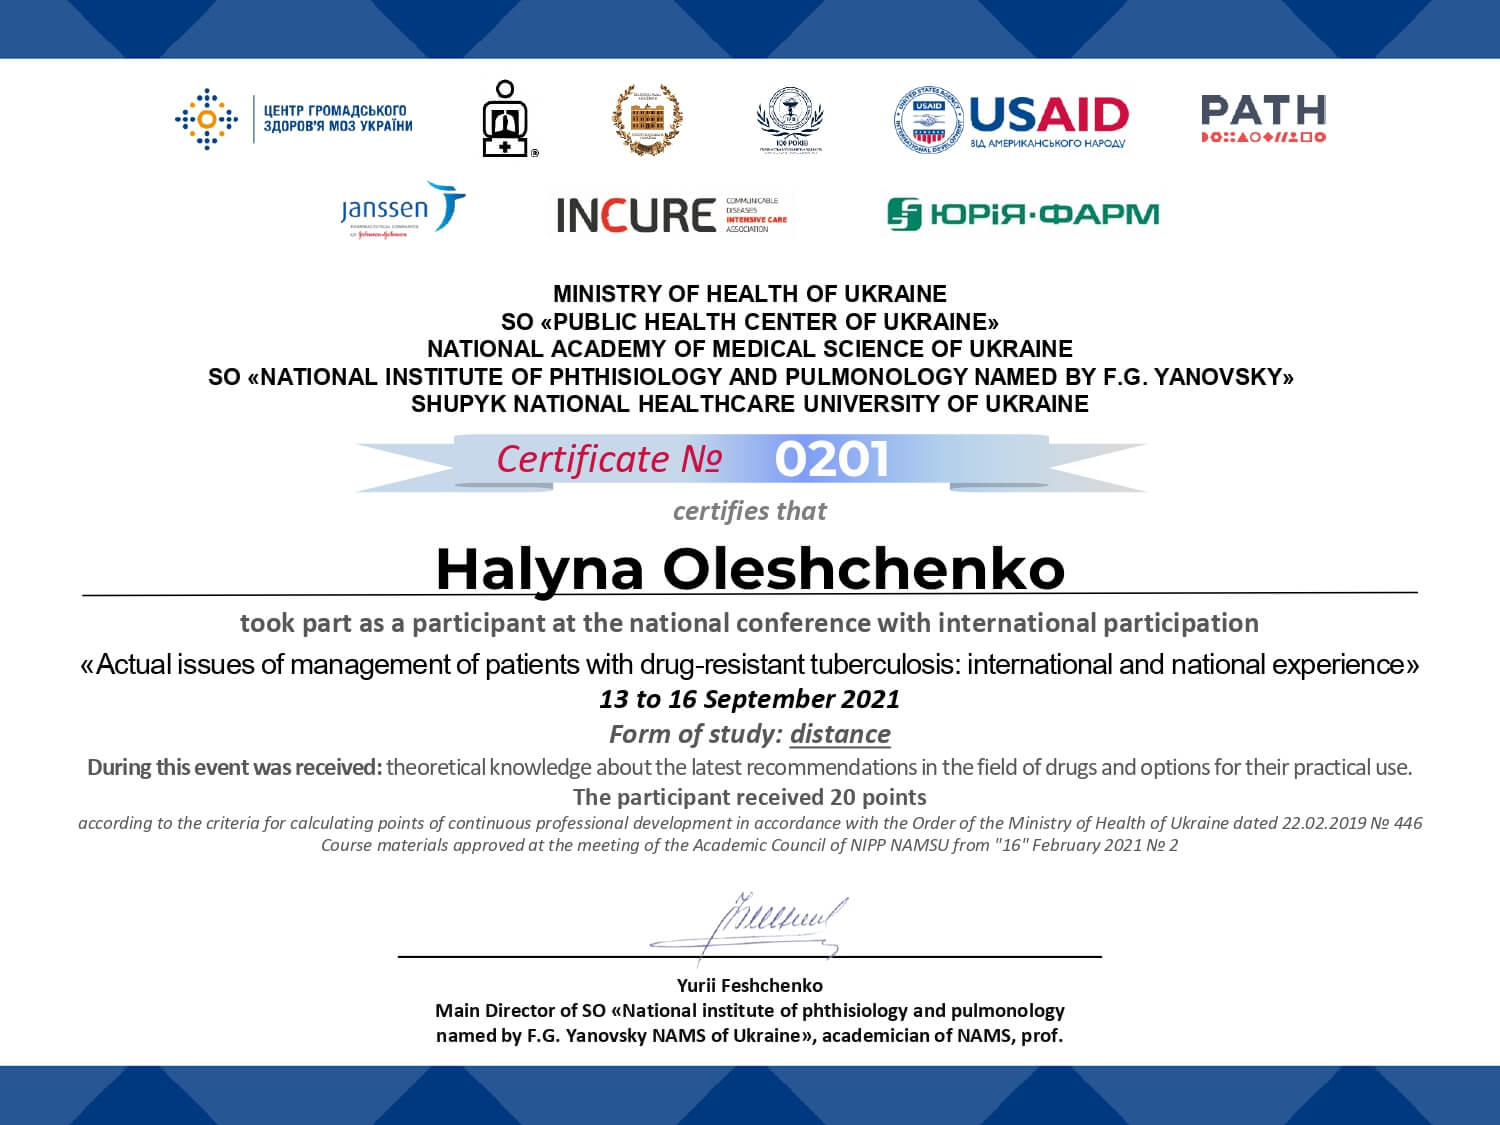 Conference with international participation